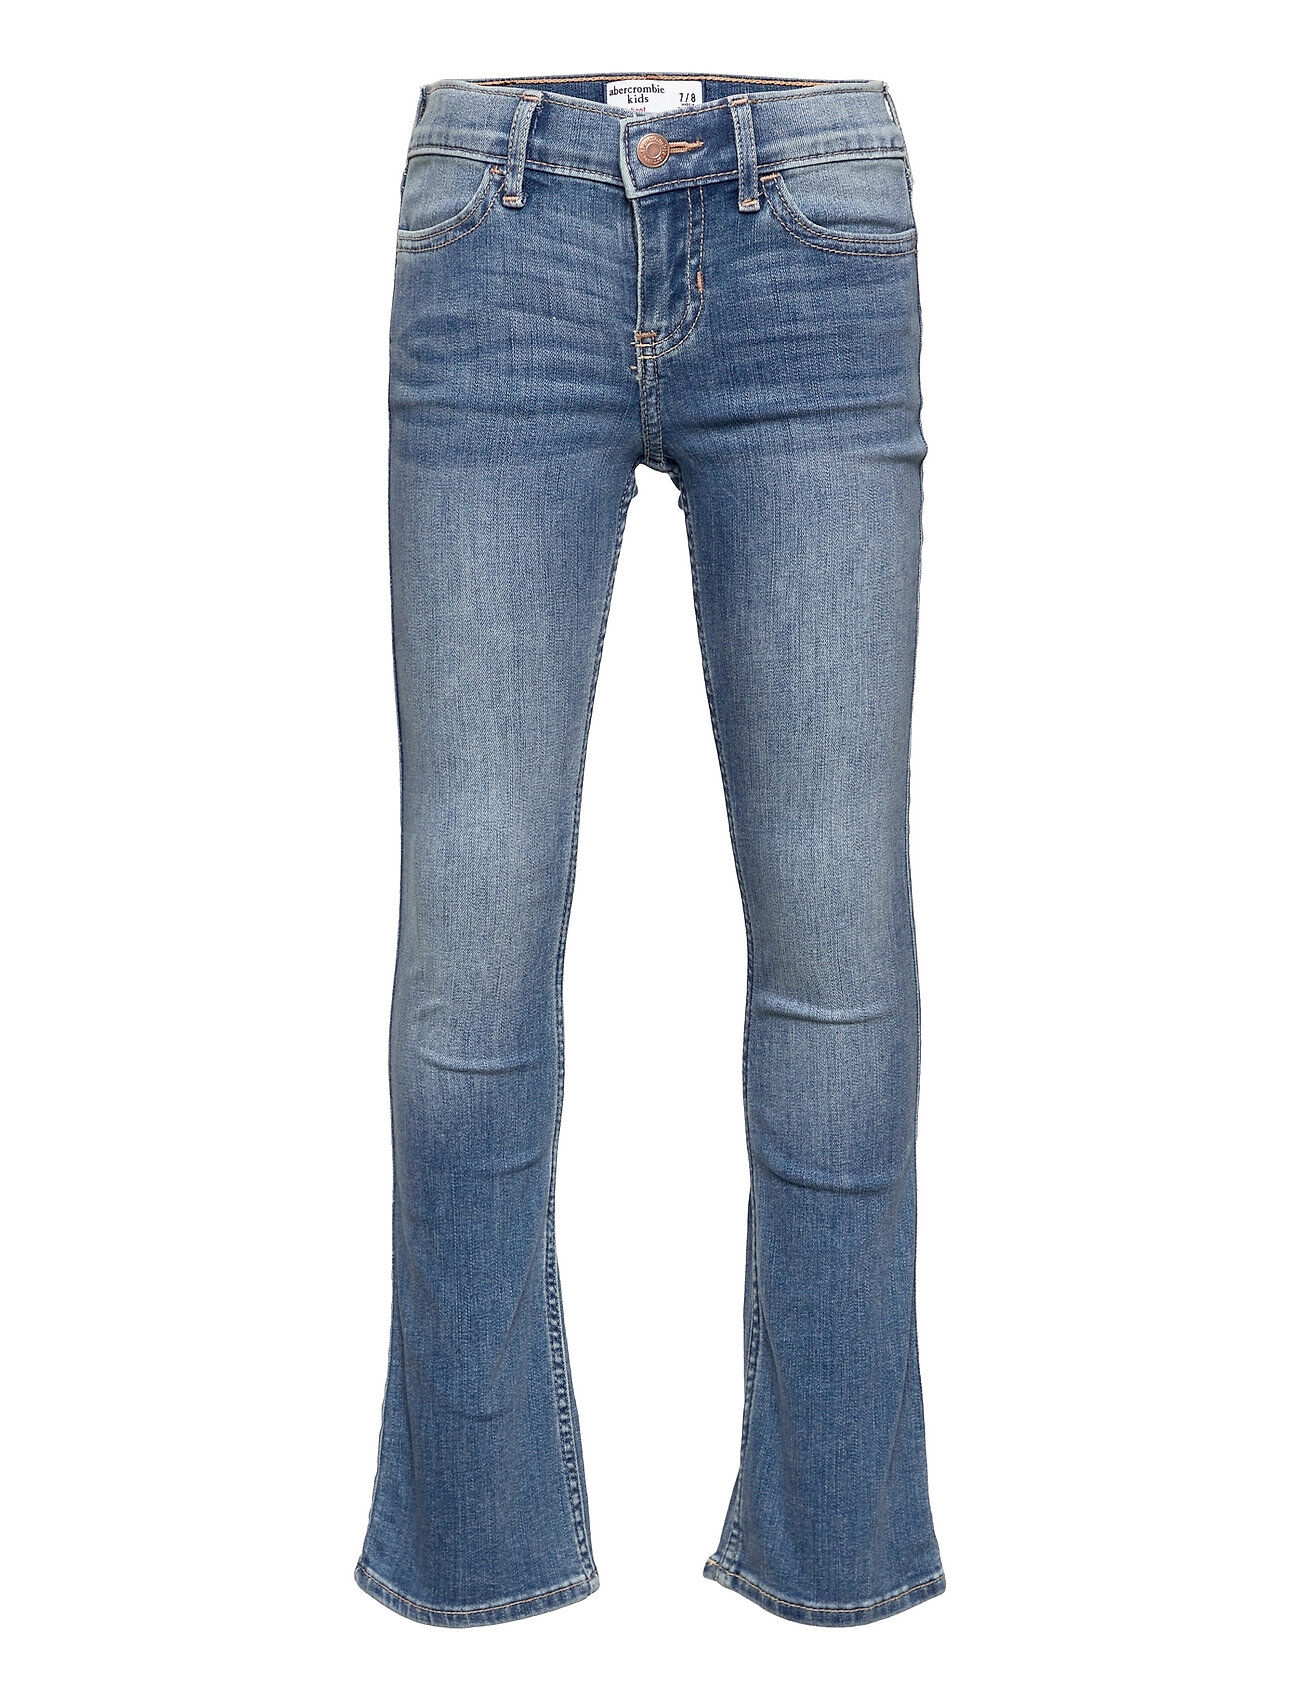 Abercrombie & Fitch Kids Girls Jeans Jeans Bootcut & Flare Jeans Blå Abercrombie & Fitch